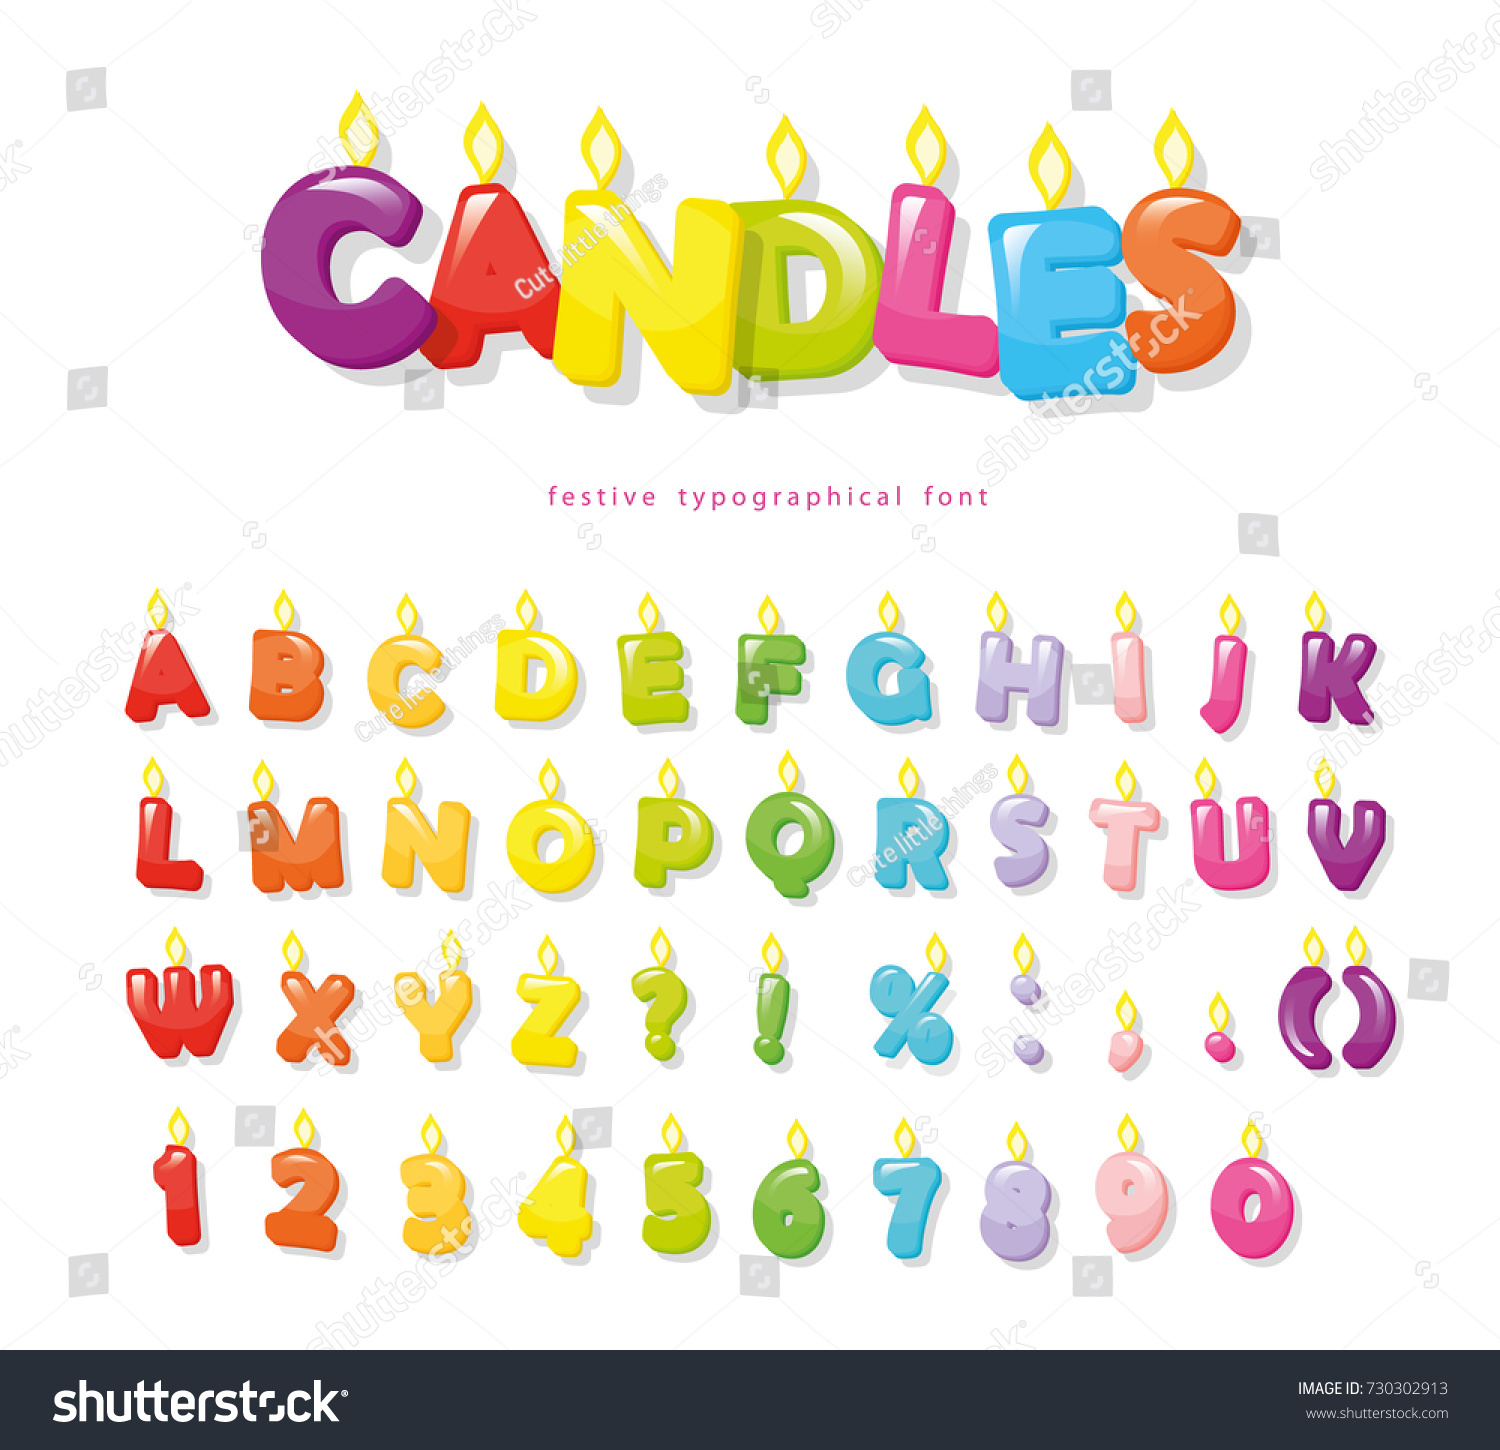 SVG of Candles font. Festive cartoon letters and numbers for birthday or other design. svg